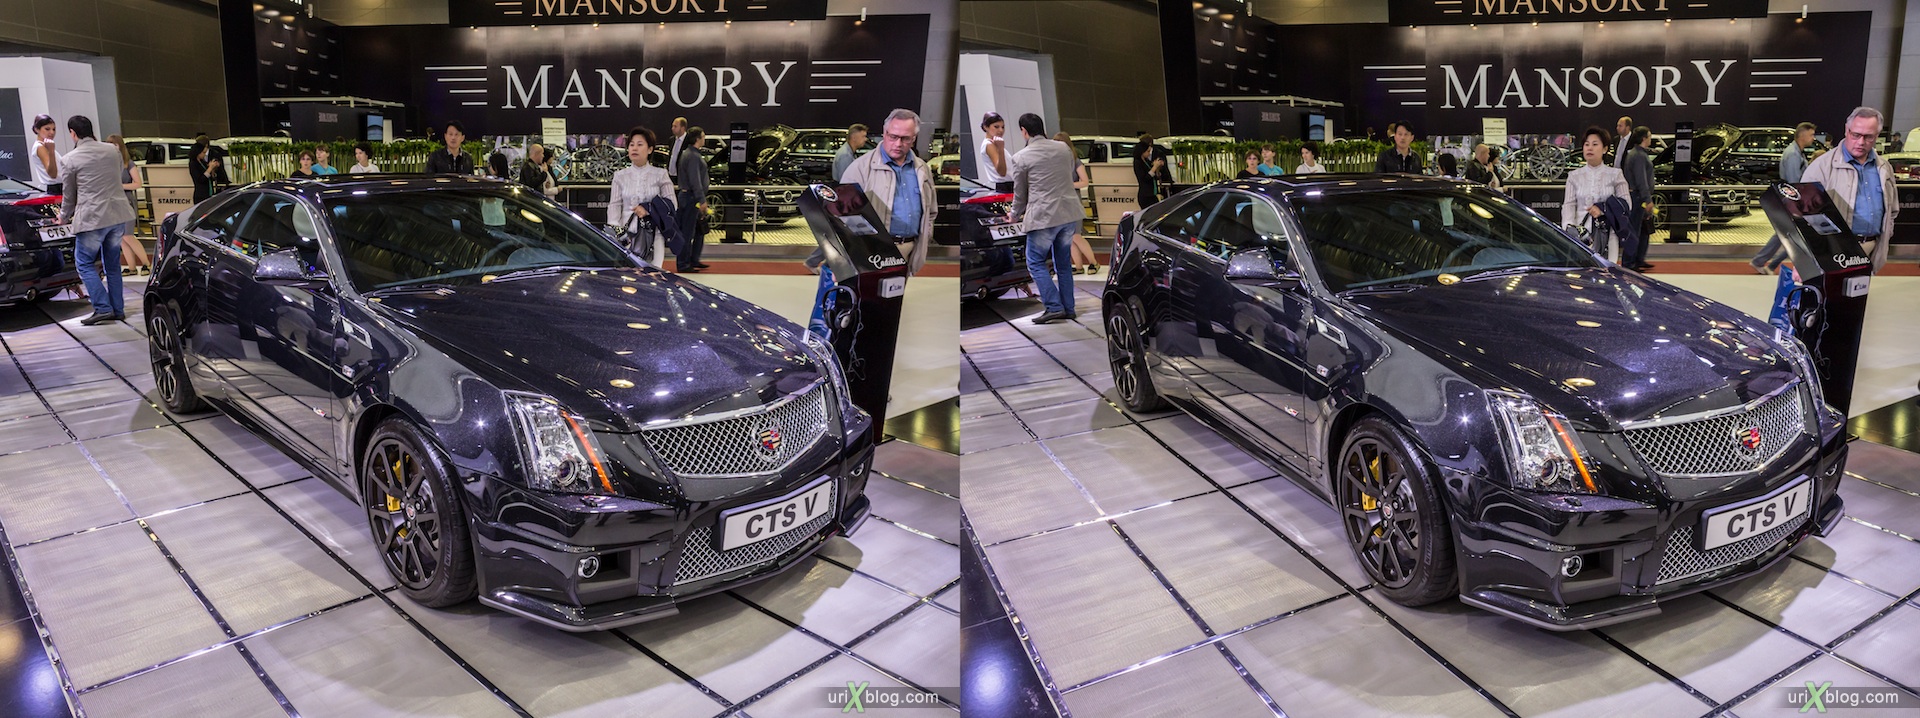 2012, Cadillac CTS V, Moscow International Automobile Salon, auto show, 3D, stereo pair, cross-eyed, crossview